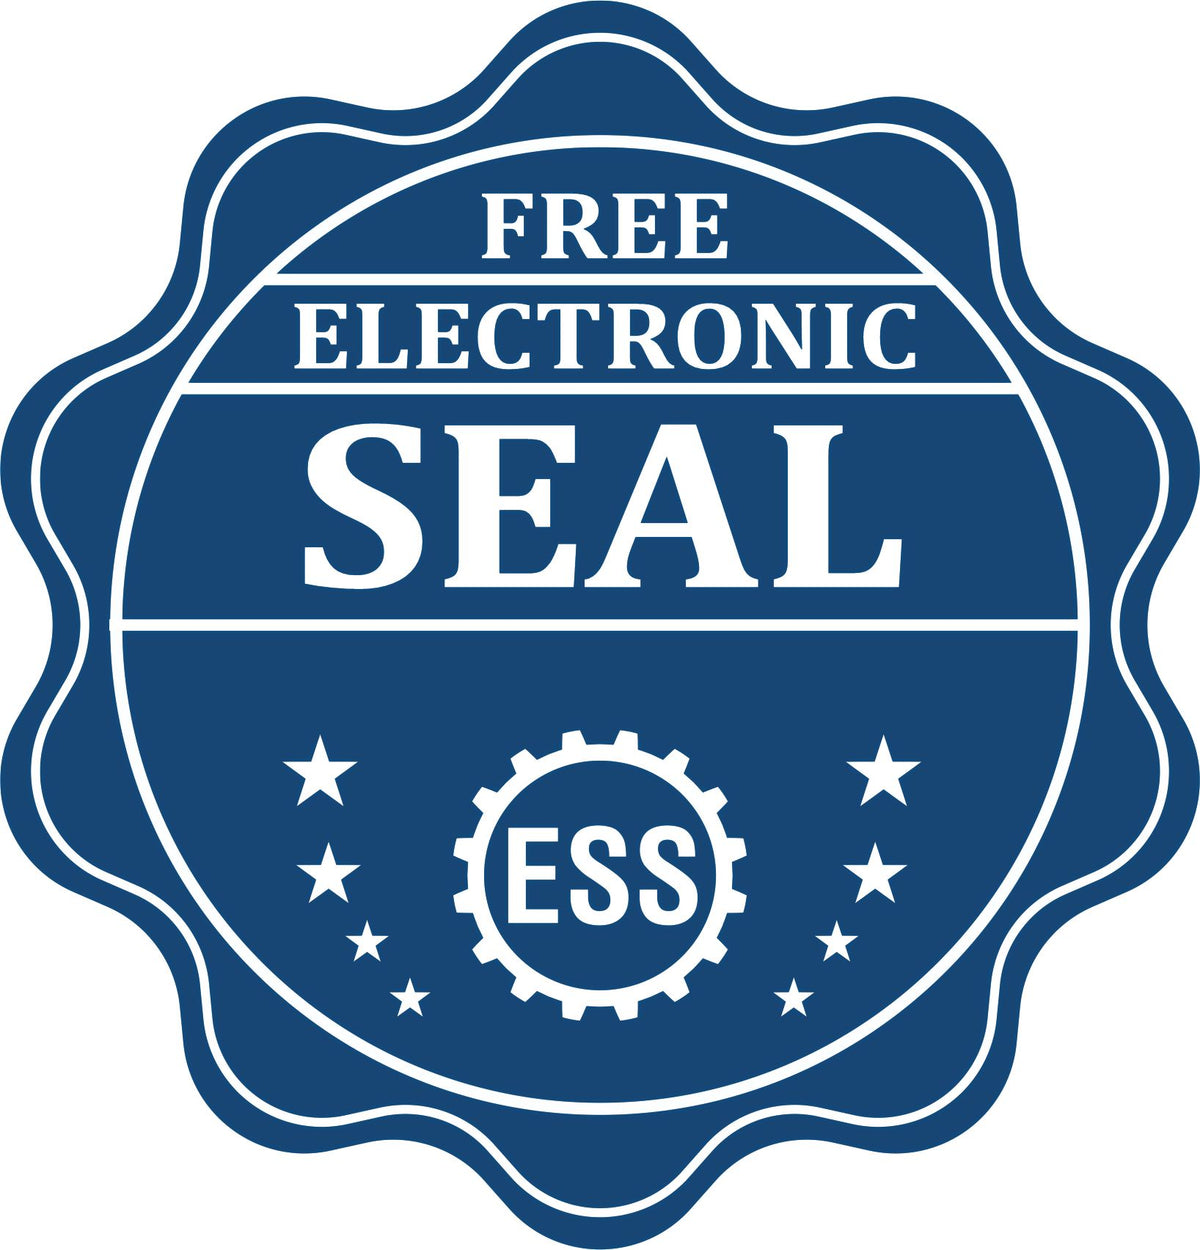 A badge showing a free electronic seal for the Slim Pre-Inked State Seal Notary Stamp for Alabama with stars and the ESS gear on the emblem.